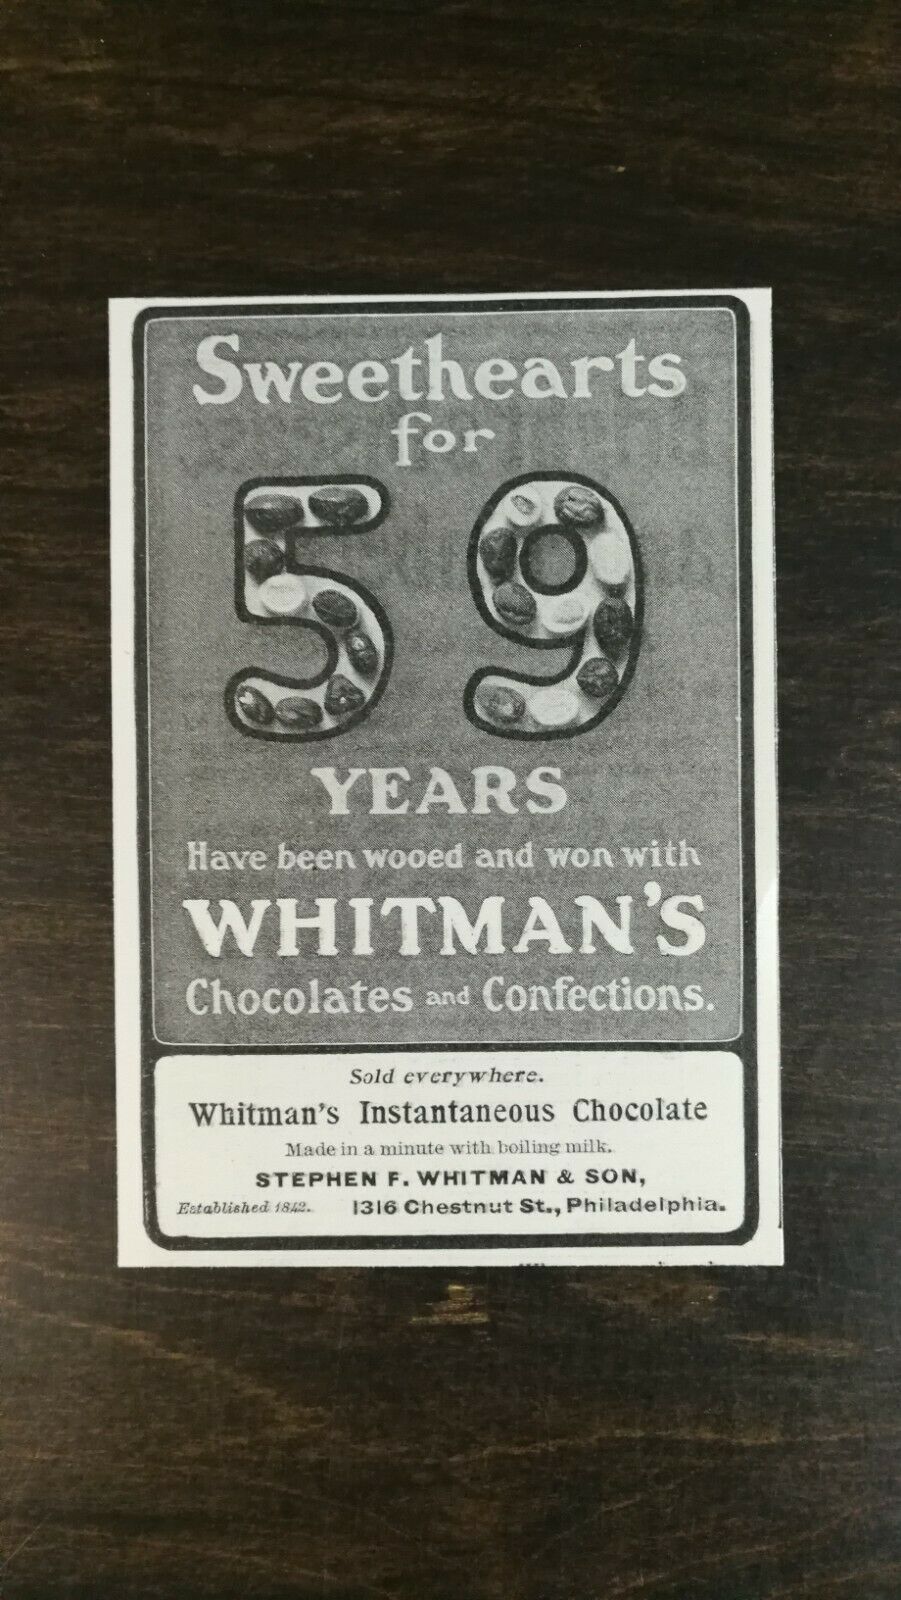 Primary image for Vintage 1901 Whitman's Chocolates and Confections 59 Years Original Ad  721